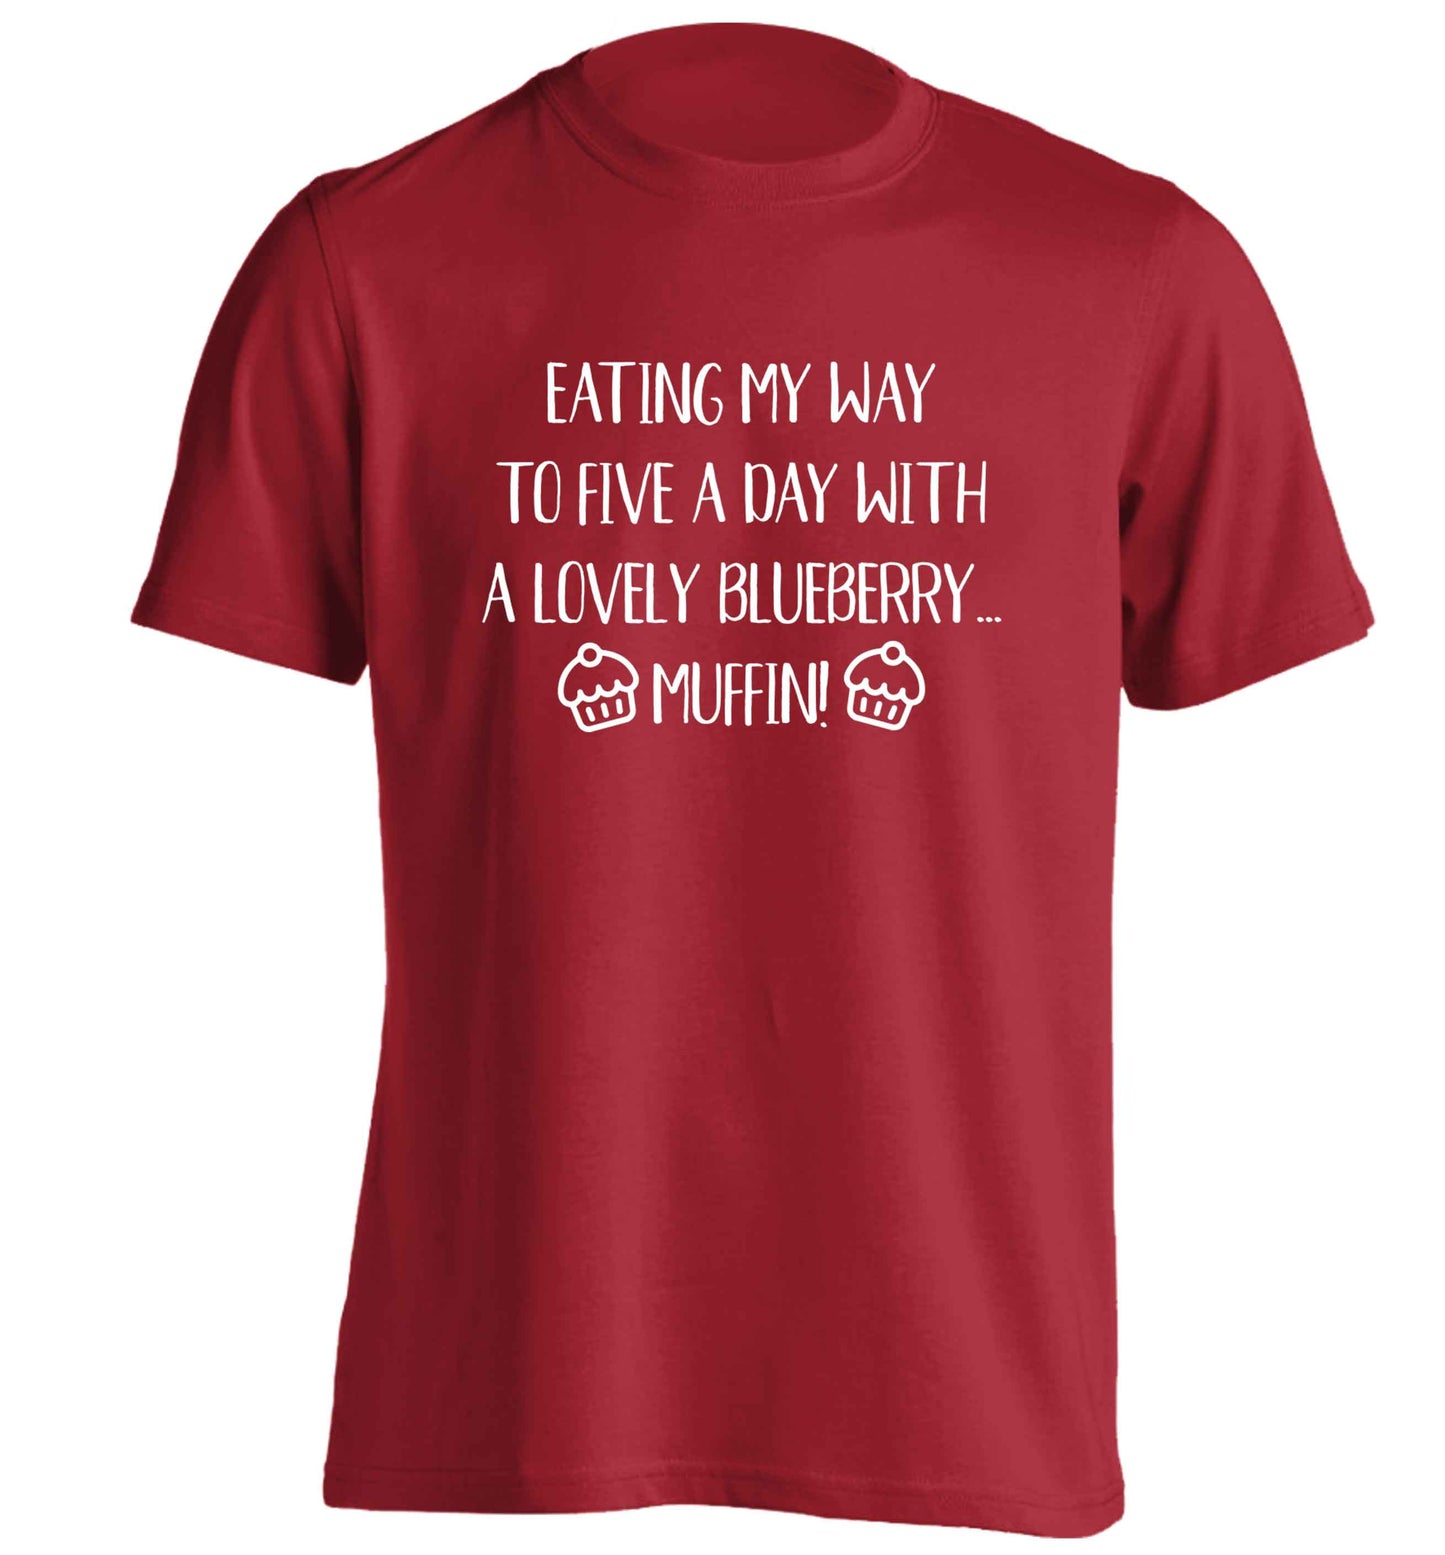 Eating my way to five a day with a lovely blueberry muffin adults unisex red Tshirt 2XL